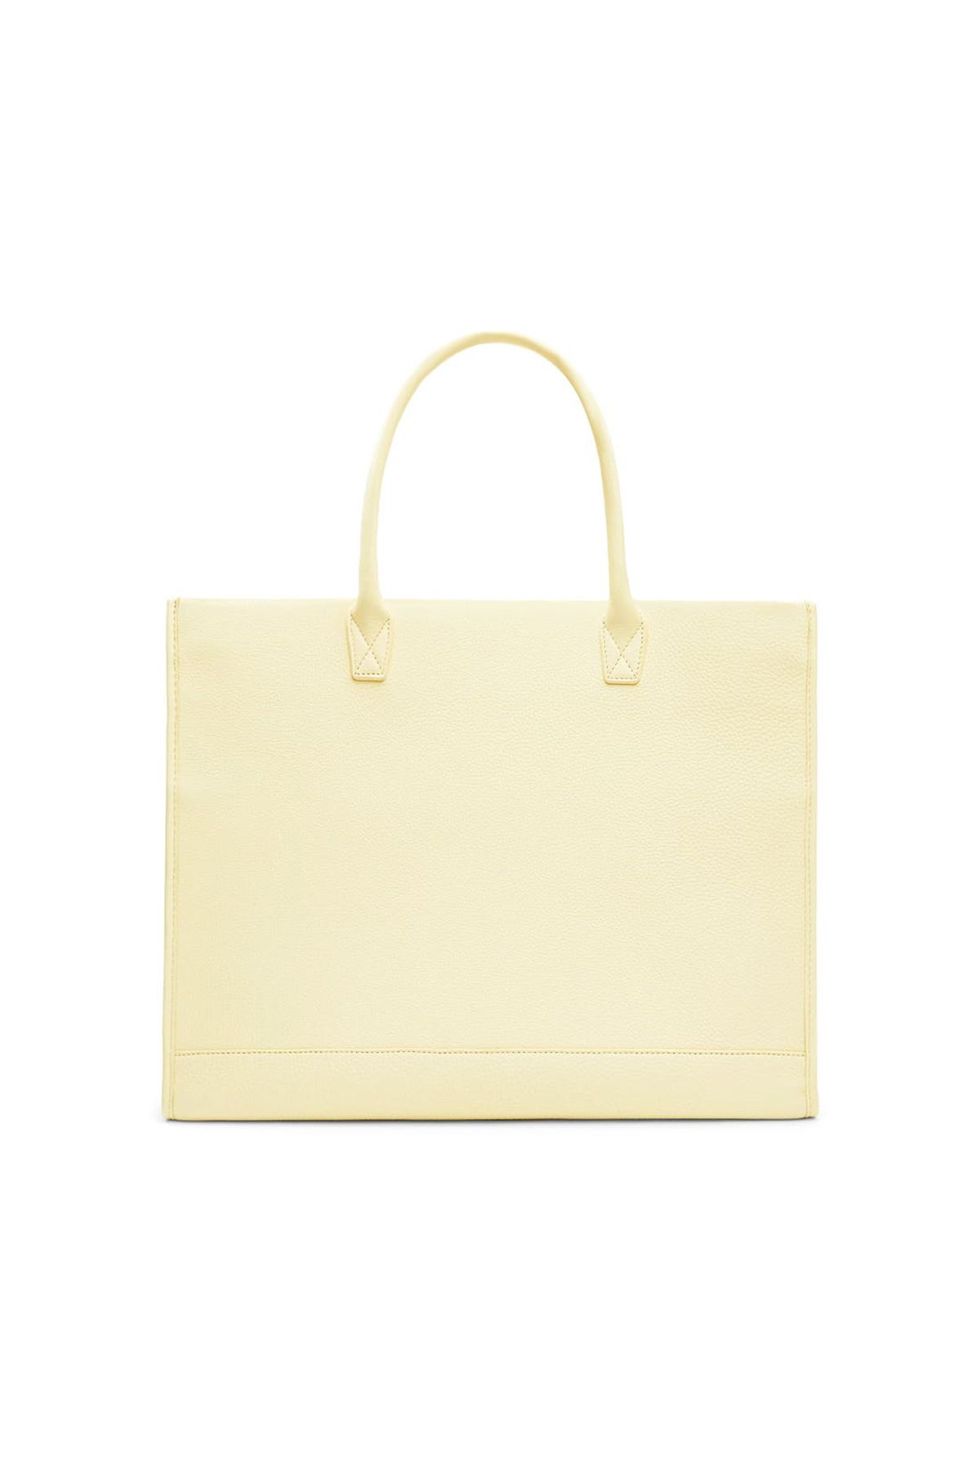 Clare V. - Simple Tote in Yellow Quilted Puffer